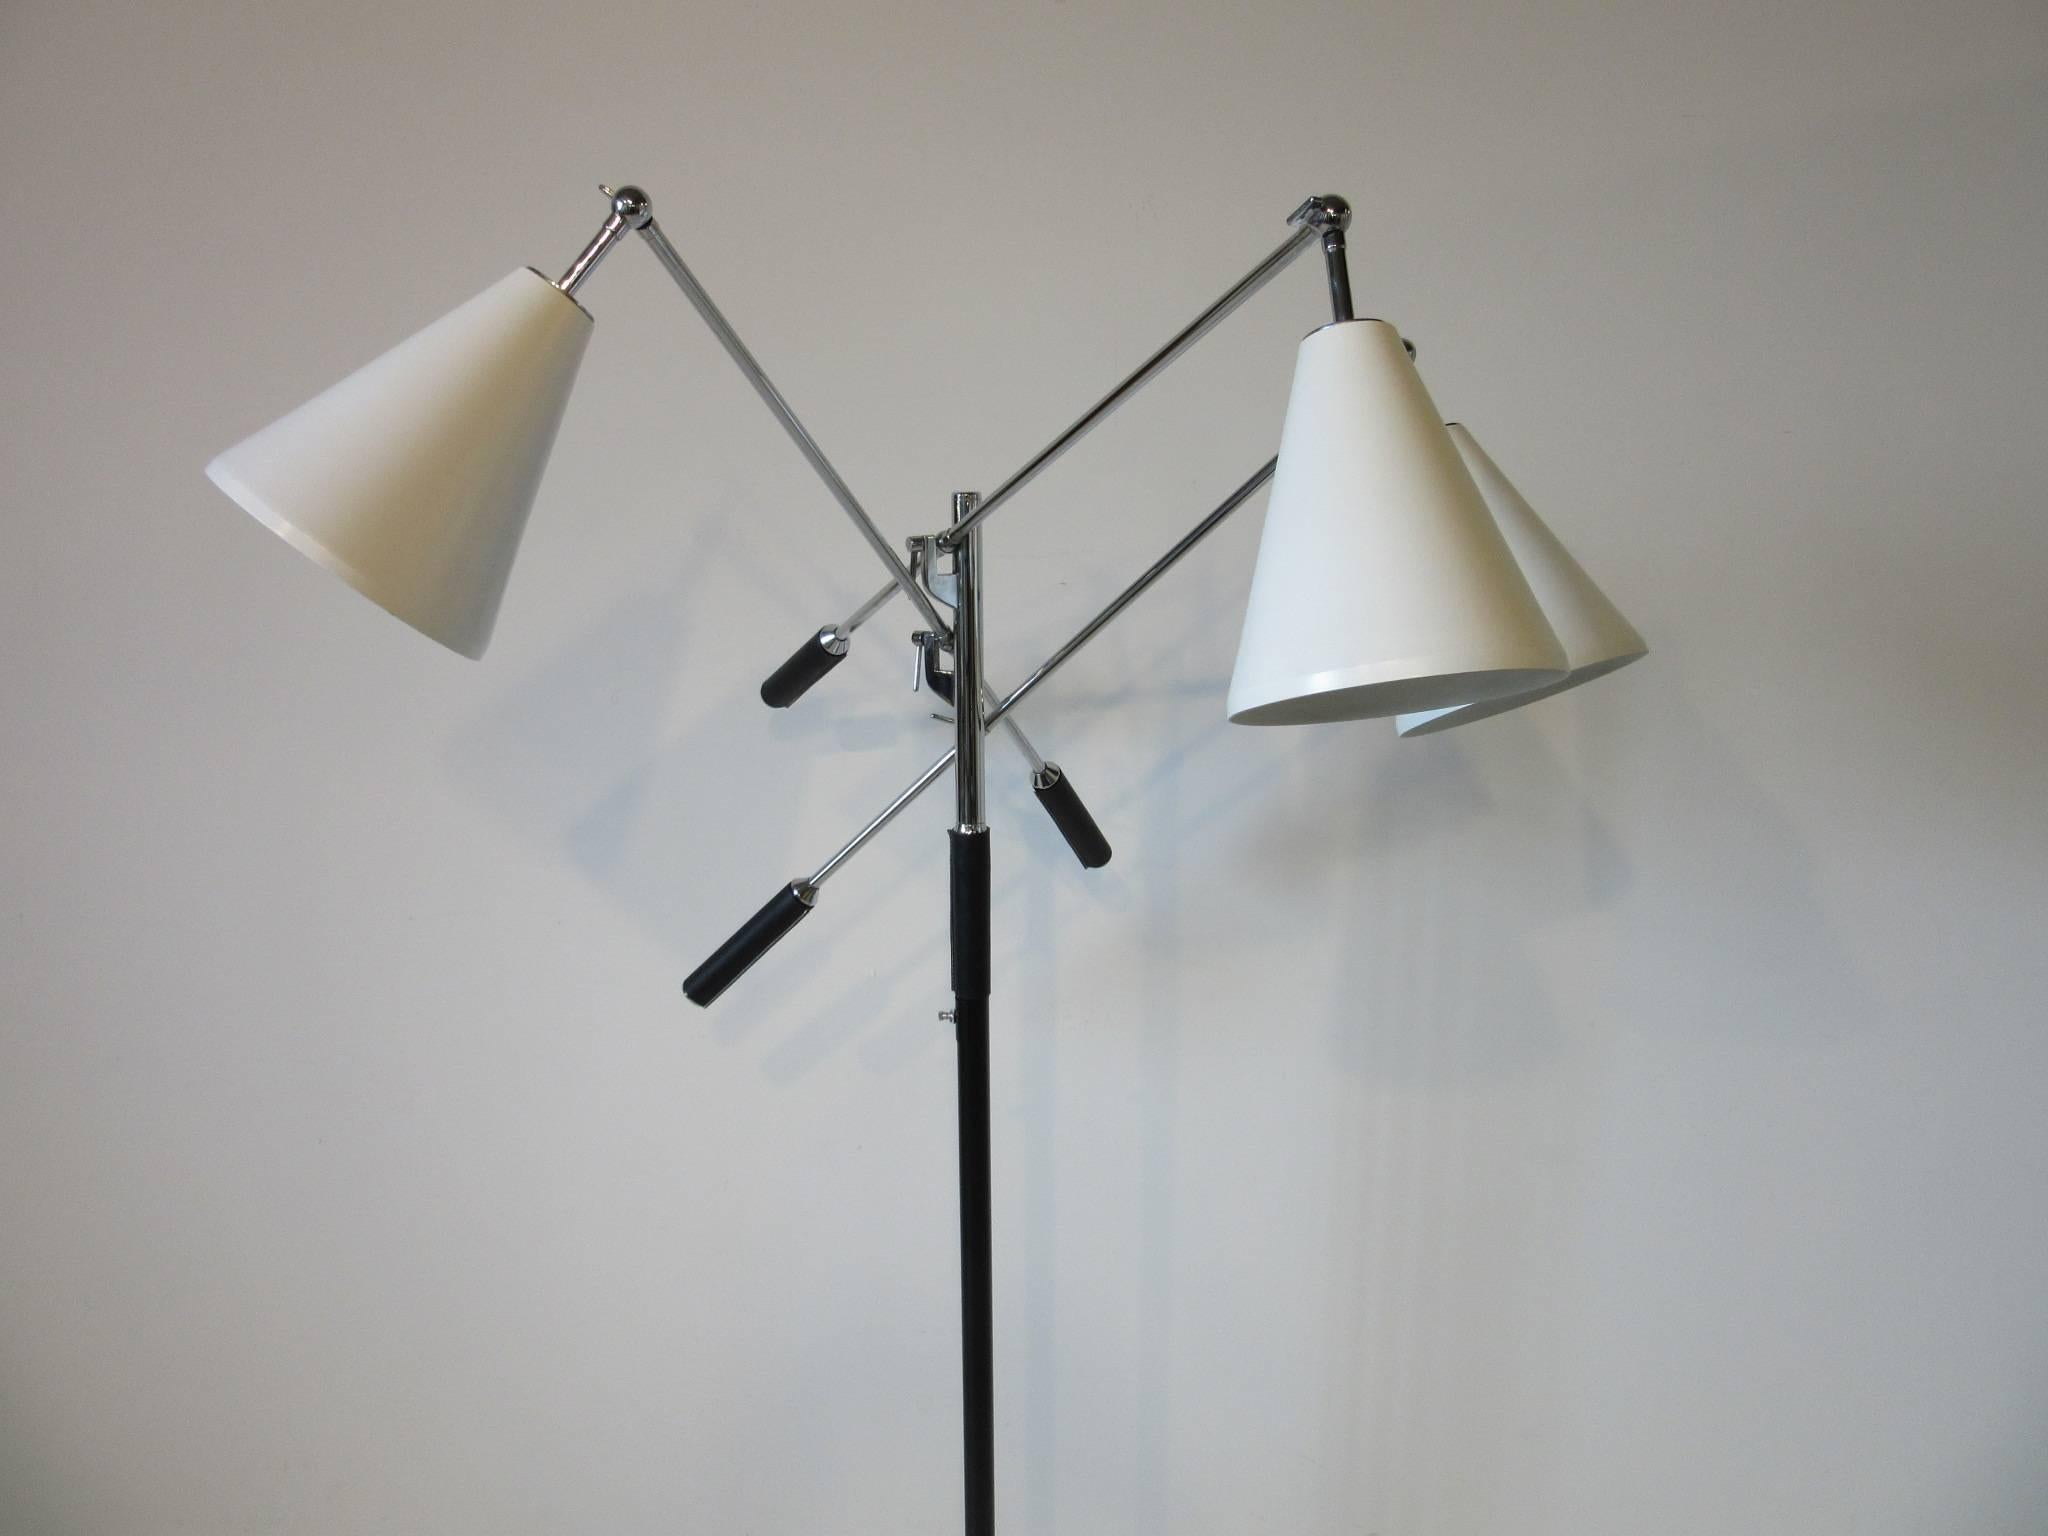 A three arm Triennale floor lamp with satin white cone shaped shades, chrome adjustable stems and staff with black leather handle covers. Having a three way light switch mounted on the pole all sitting on a round white Carrara marble base and is